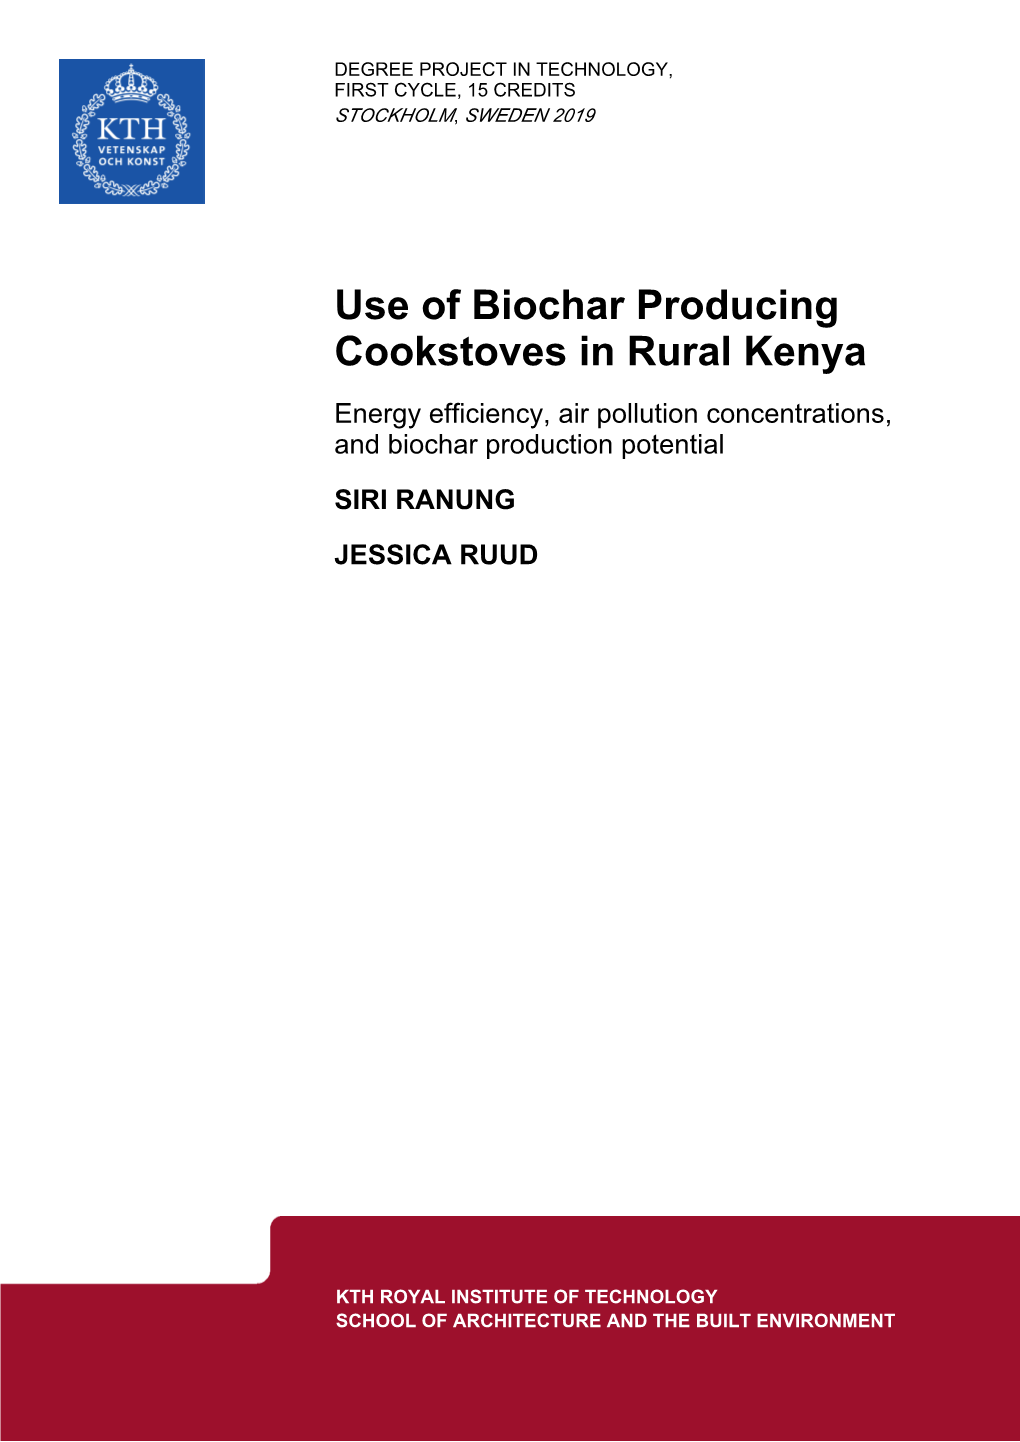 Use of Biochar Producing Cookstoves in Rural Kenya Energy Efficiency, Air Pollution Concentrations, and Biochar Production Potential